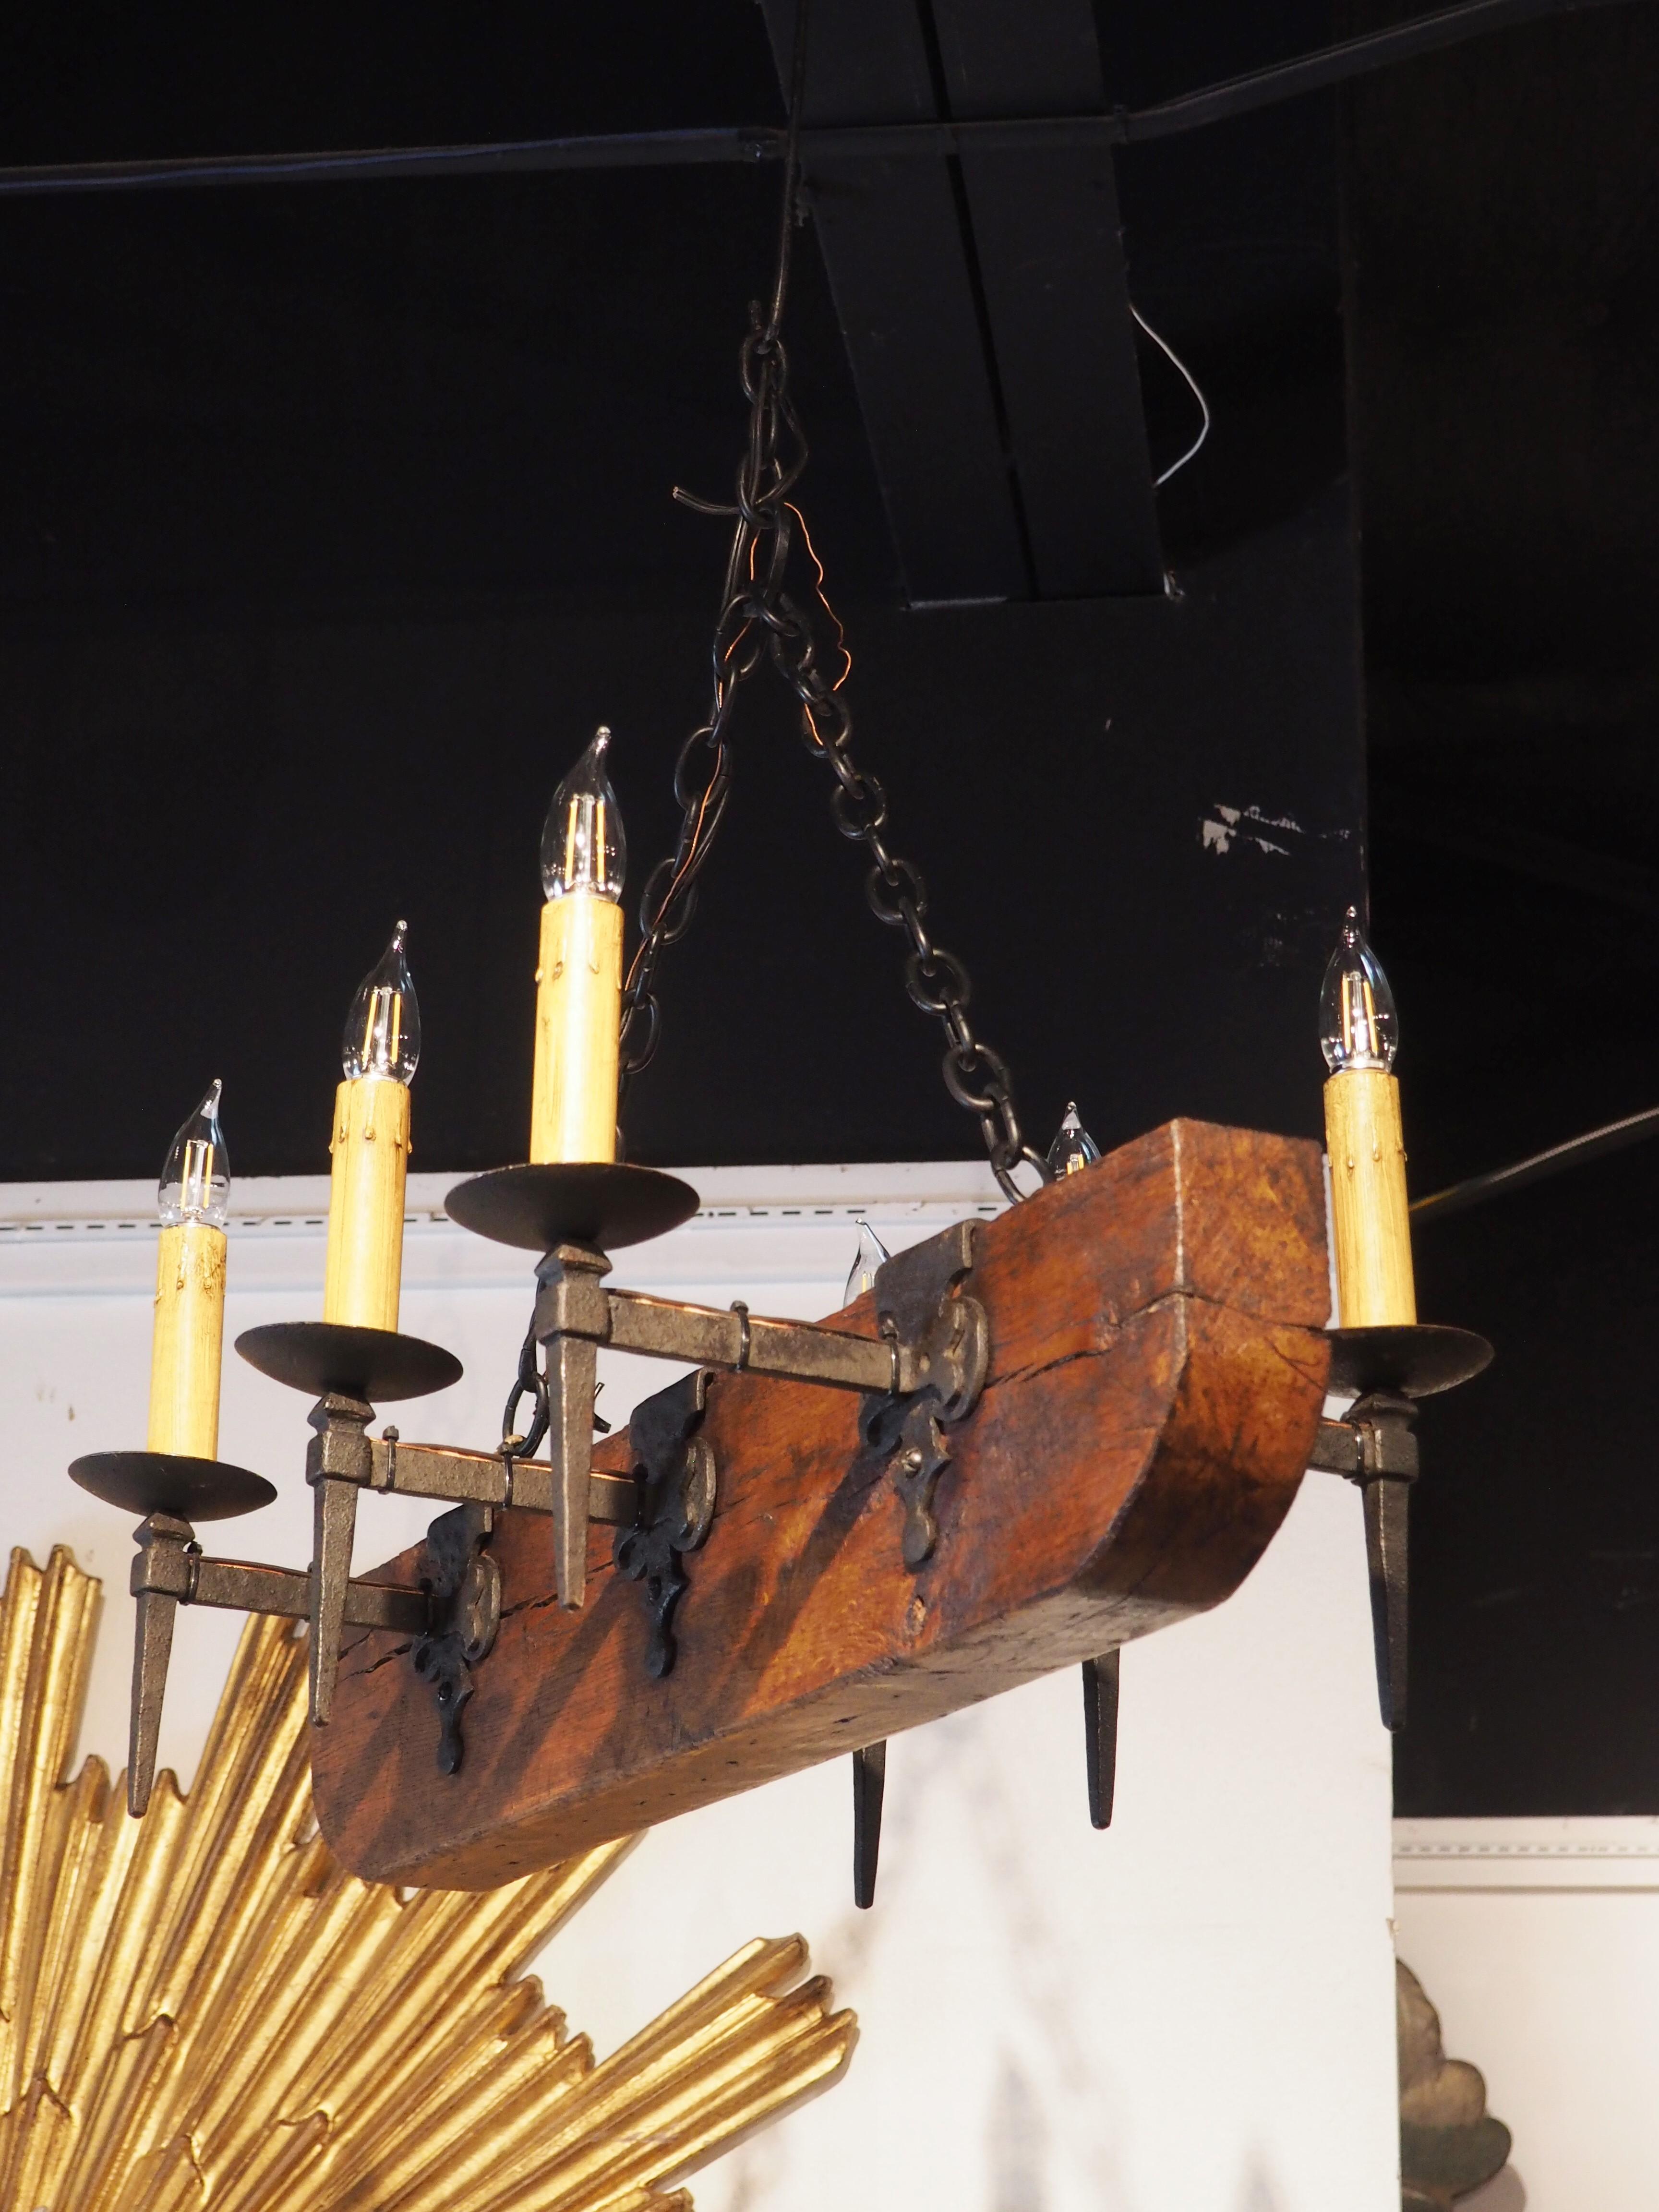 Constructed in France during the mid-1900s, the body of this six-light chandelier is comprised of a 6 5/8-inch thick 19th-century oak beam with a lovely golden brown patina. Each of the wrought iron arms has a black finish and extends roughly 8 ½